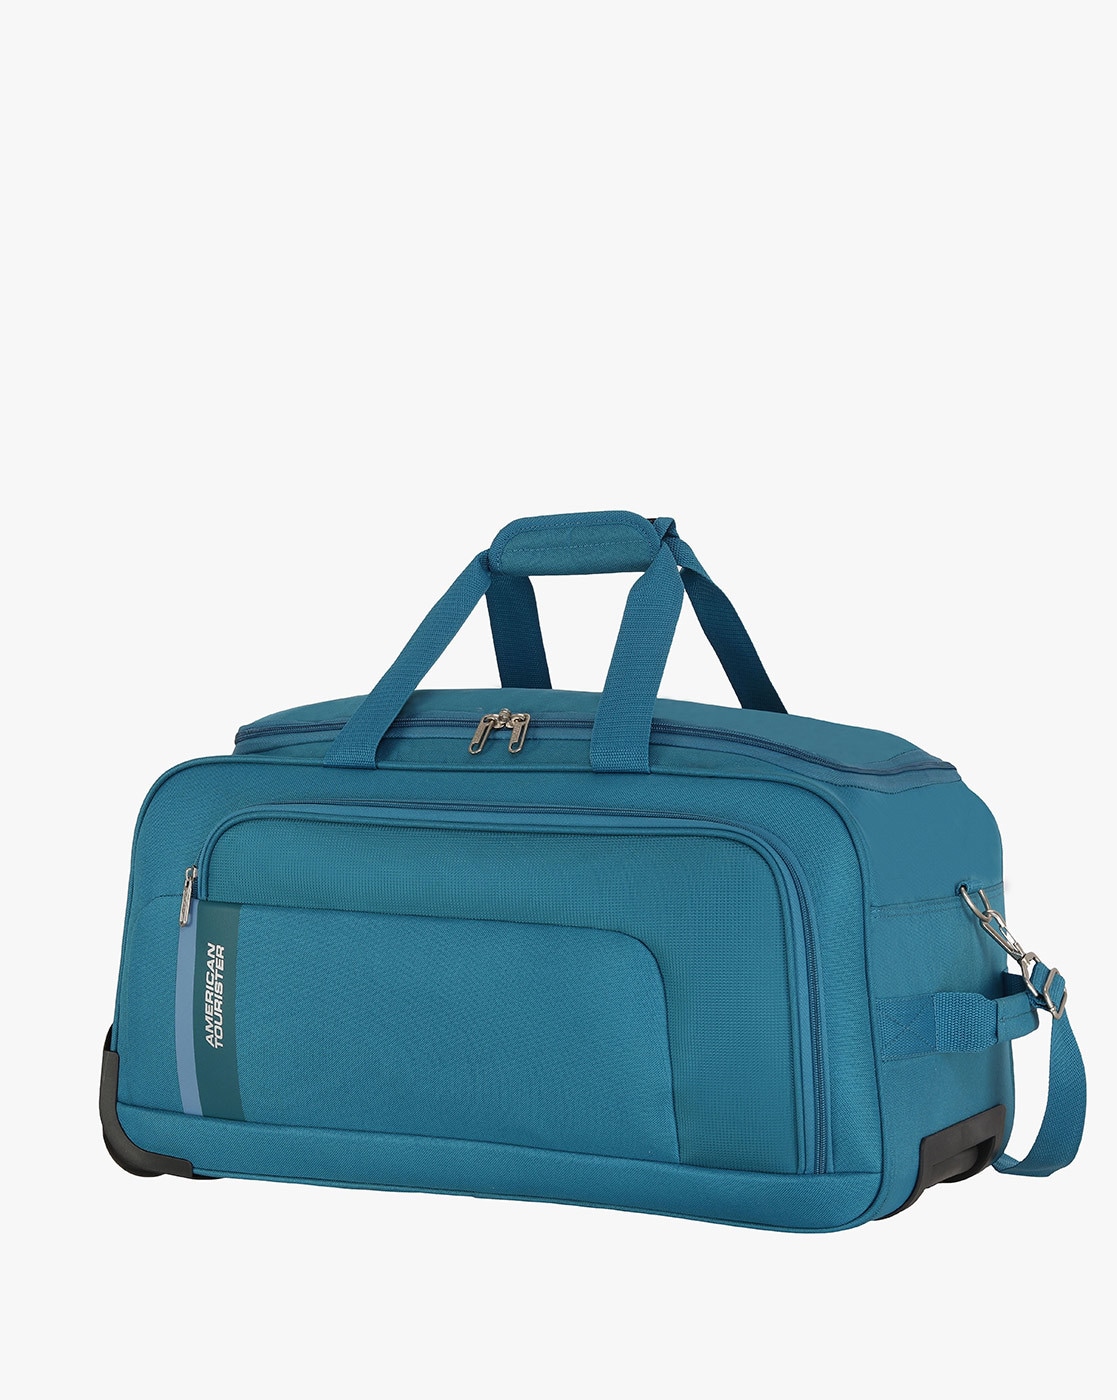 Sturdy Wholesale American Tourister Bags For Casual And Travel Use -  Alibaba.com